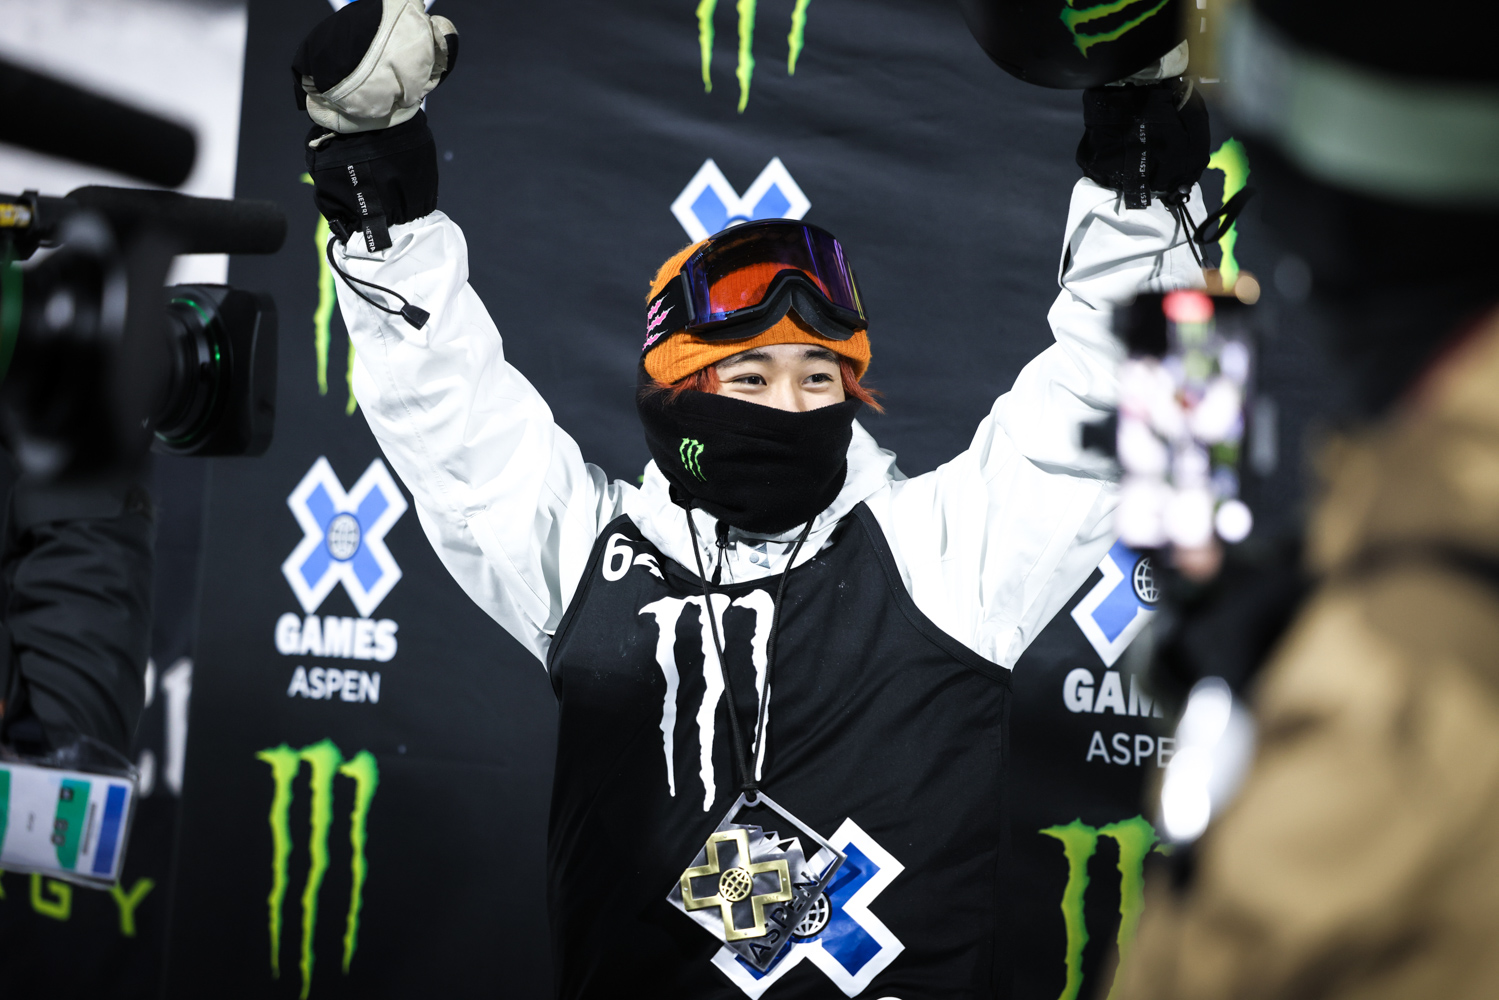 Monster Energy's Yuto Totsuka Will Compete in Men's Snowboard SuperPipe at X Games Aspen 2022